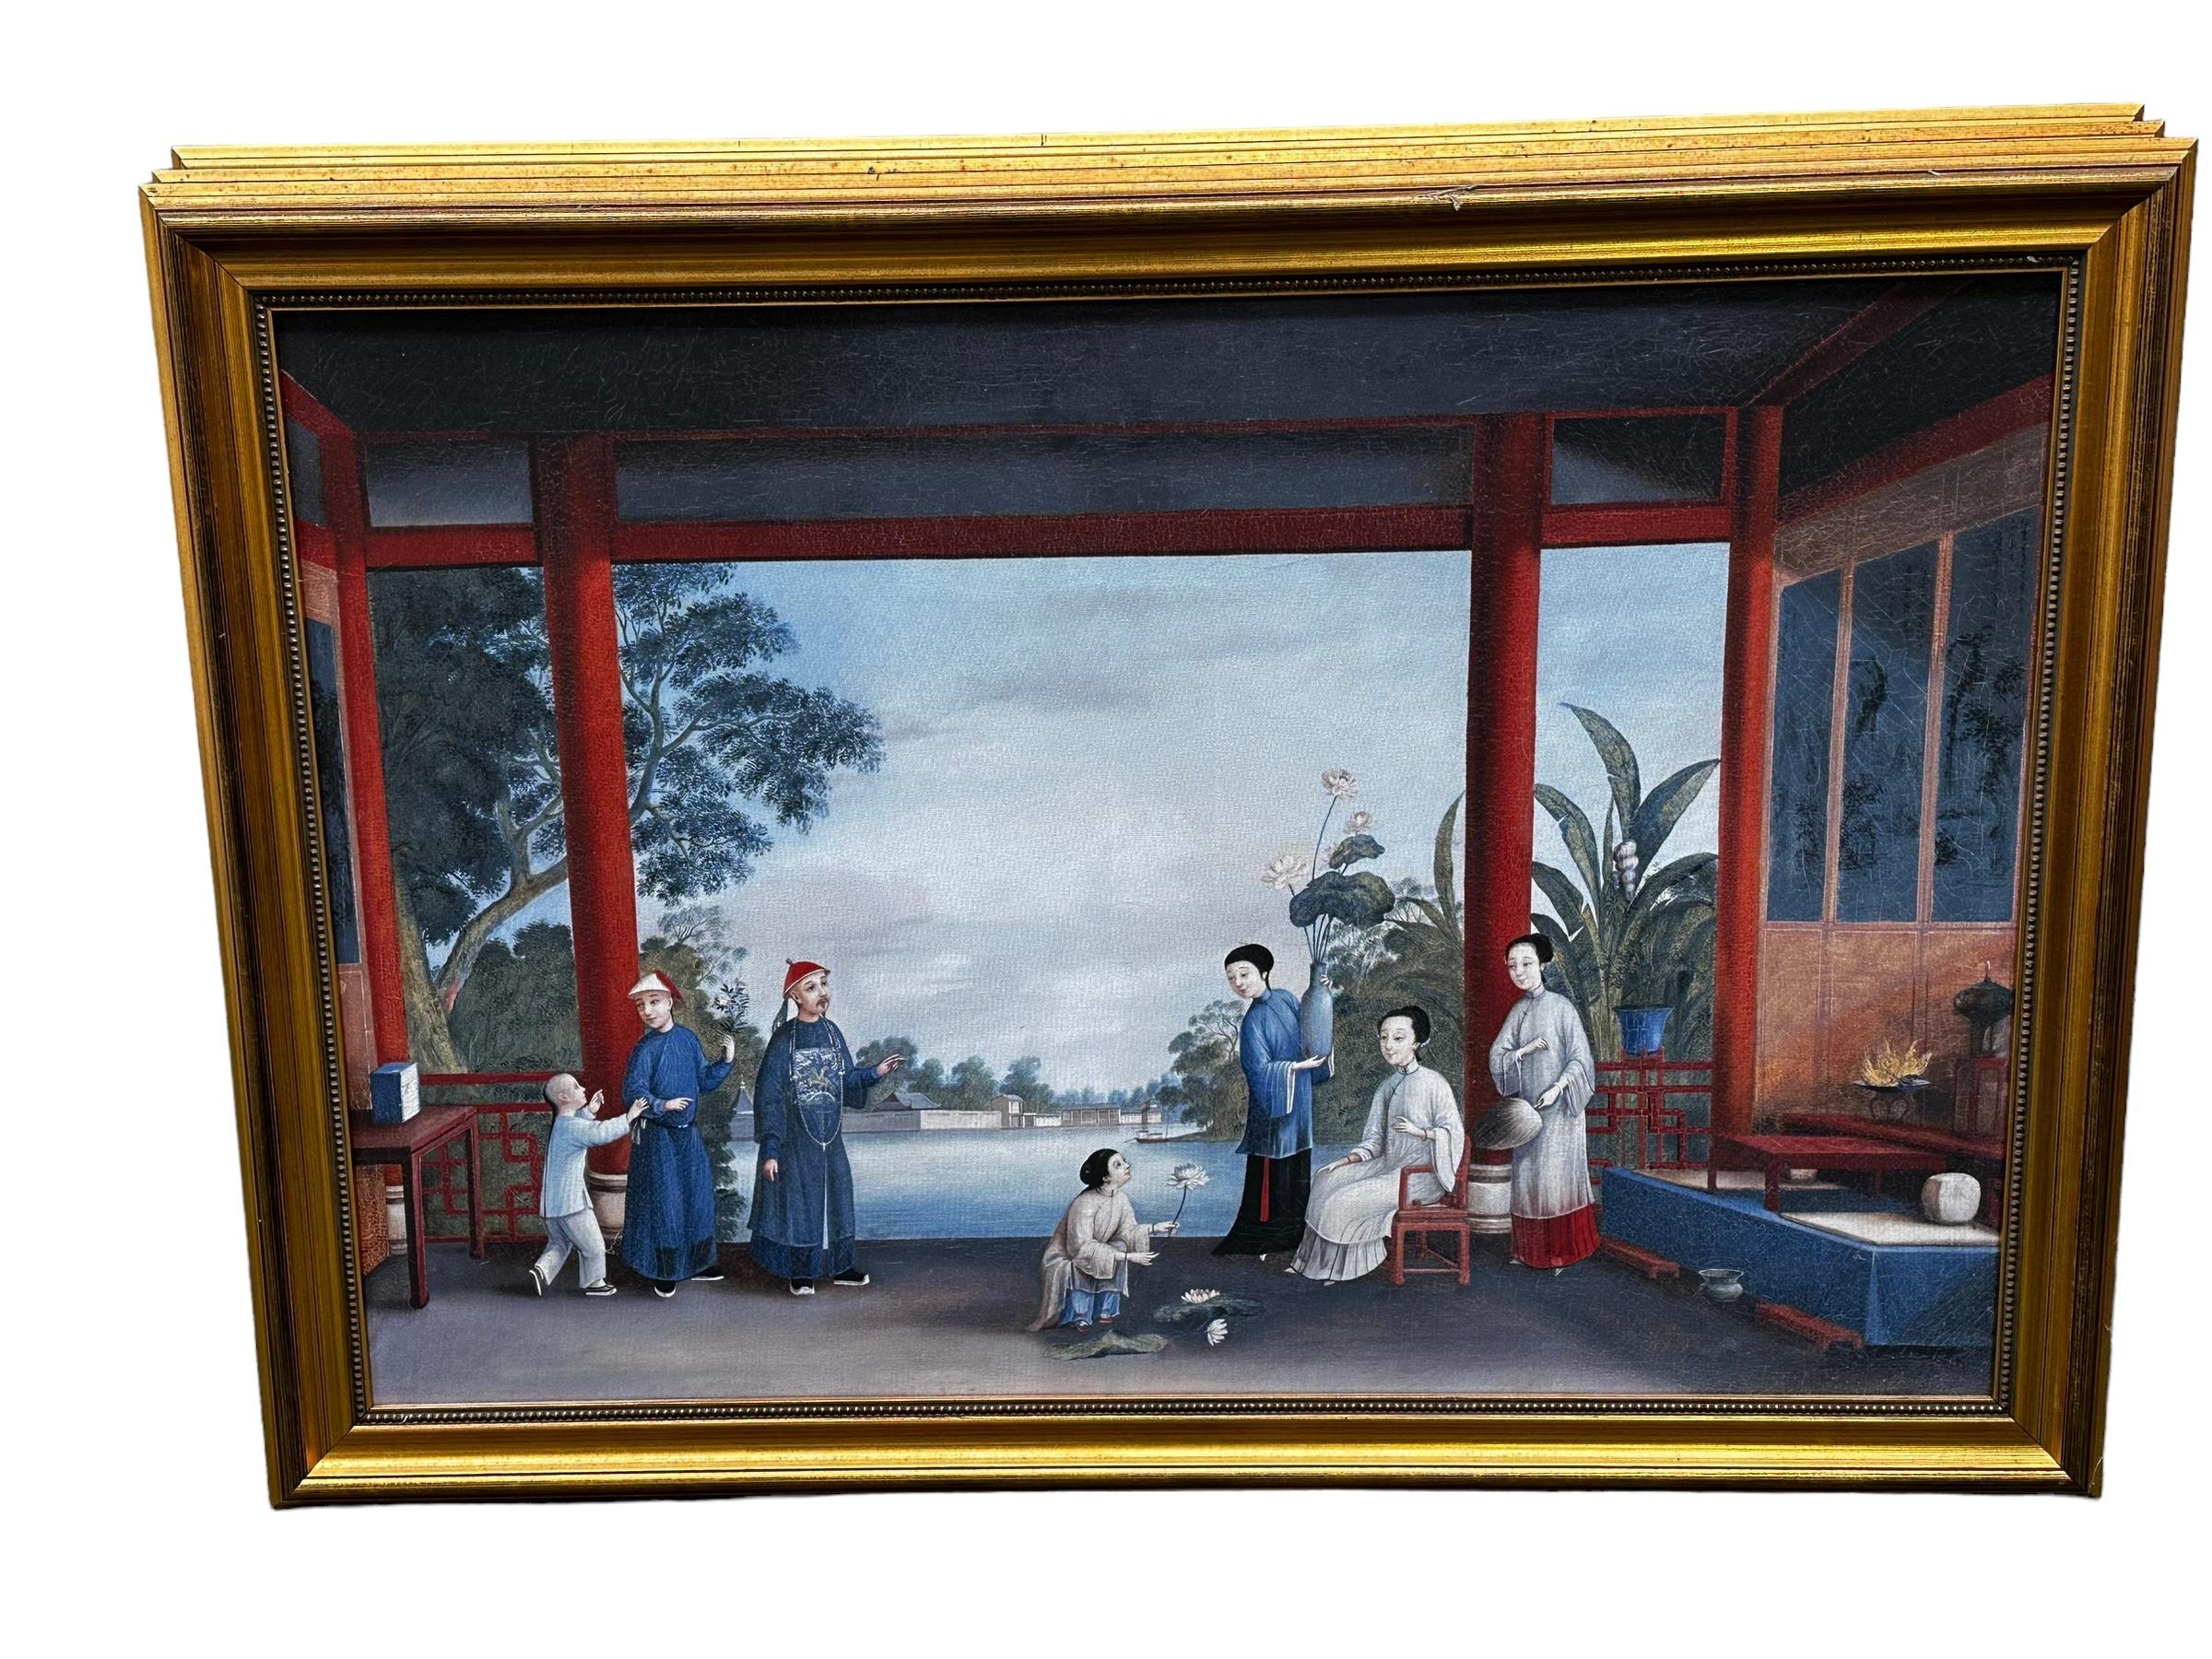 A Set of six C20th gilt framed reproduction copy prints, "Views of Chinese social life", from the - Image 6 of 8